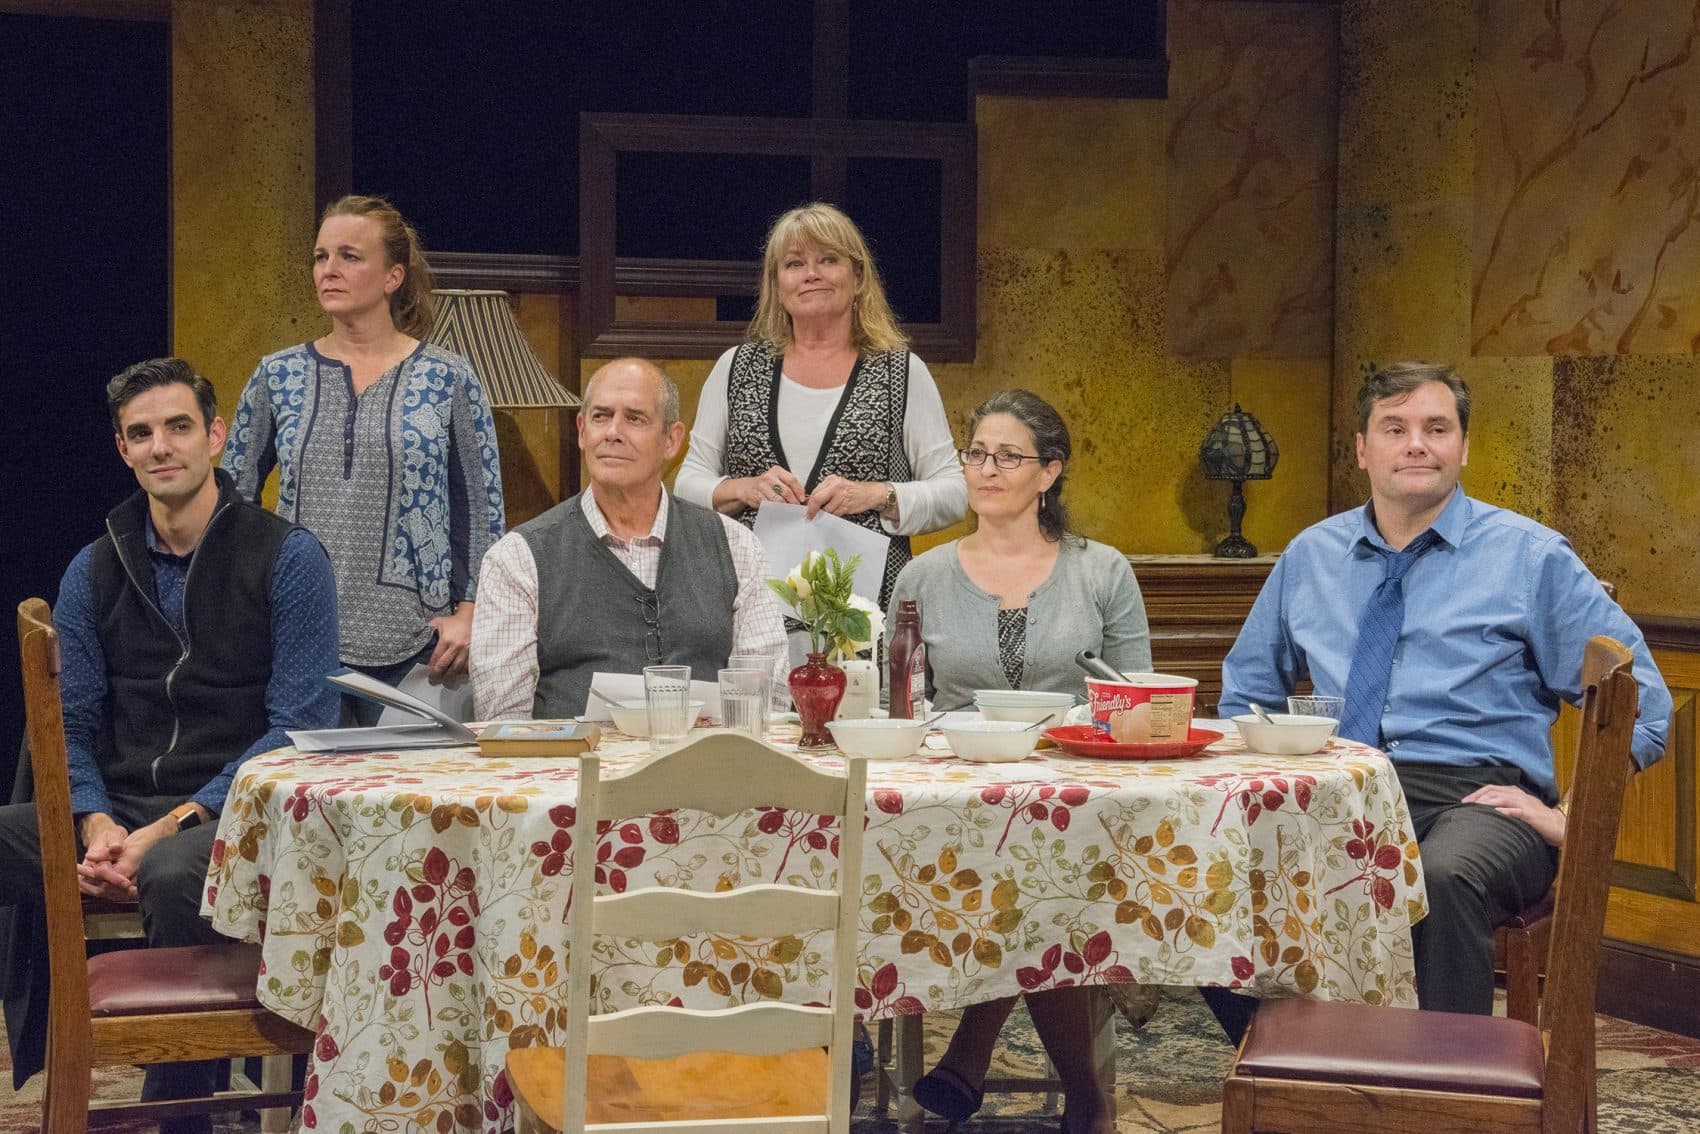 Left to right: Paul Melendy, Laura Latreille, Joel Colodner, Karen MacDonald, Sarah Newhouse and Bill Mootos in the New Repertory Theatre's production of &quot;Regular Singing.&quot; (Courtesy Andrew Brilliant / Brilliant Pictures)